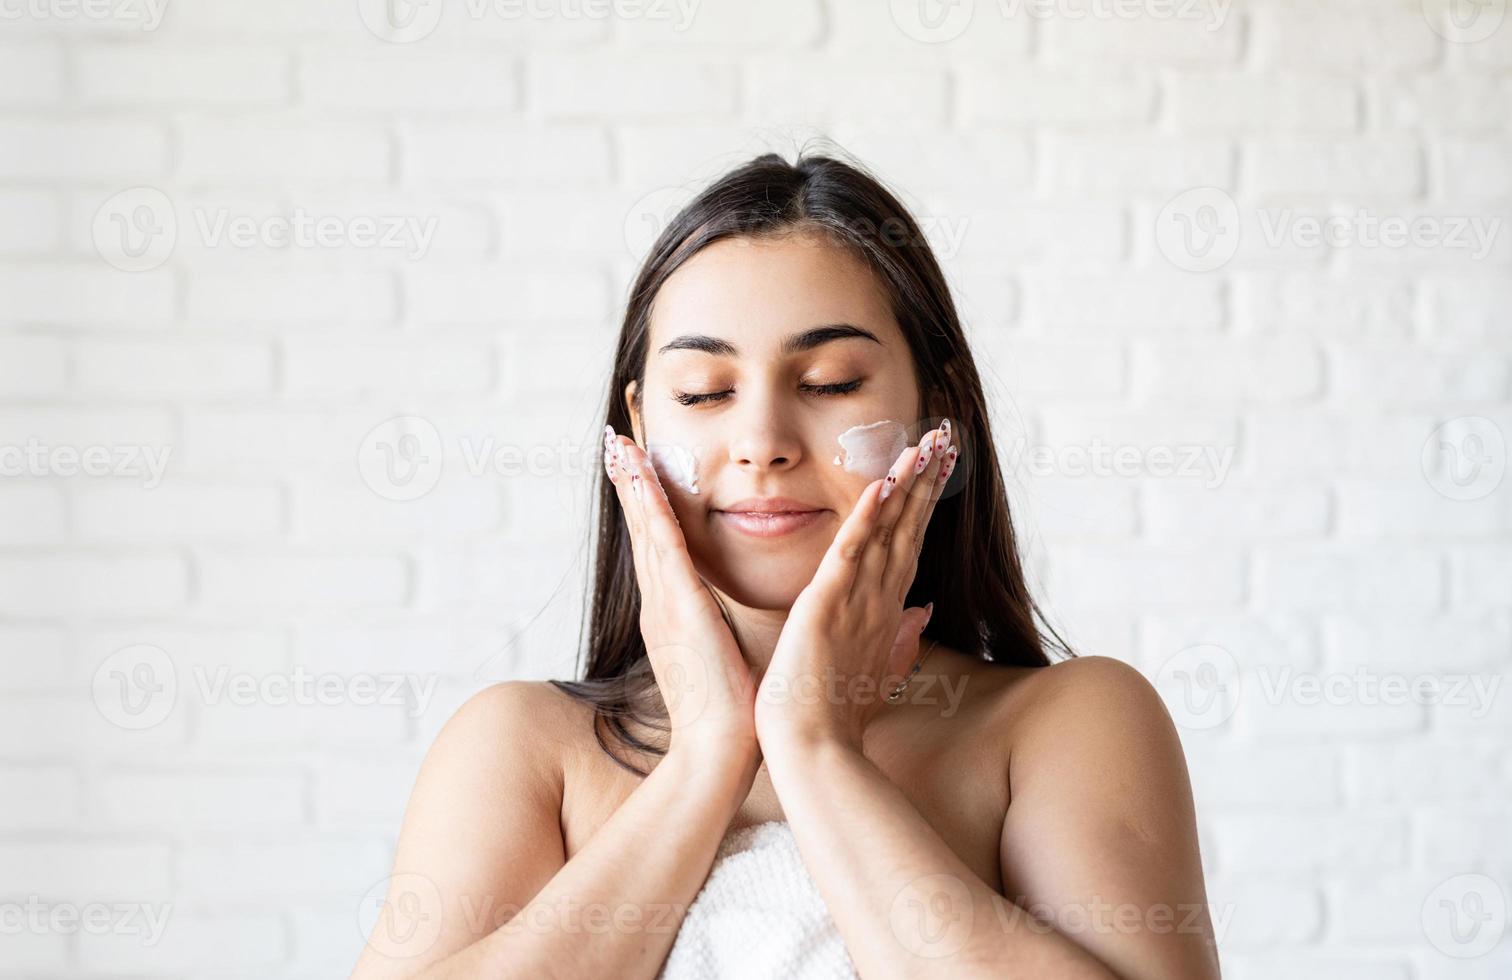 Happy beautiful woman wearing bath robes applying facial cream on her face photo